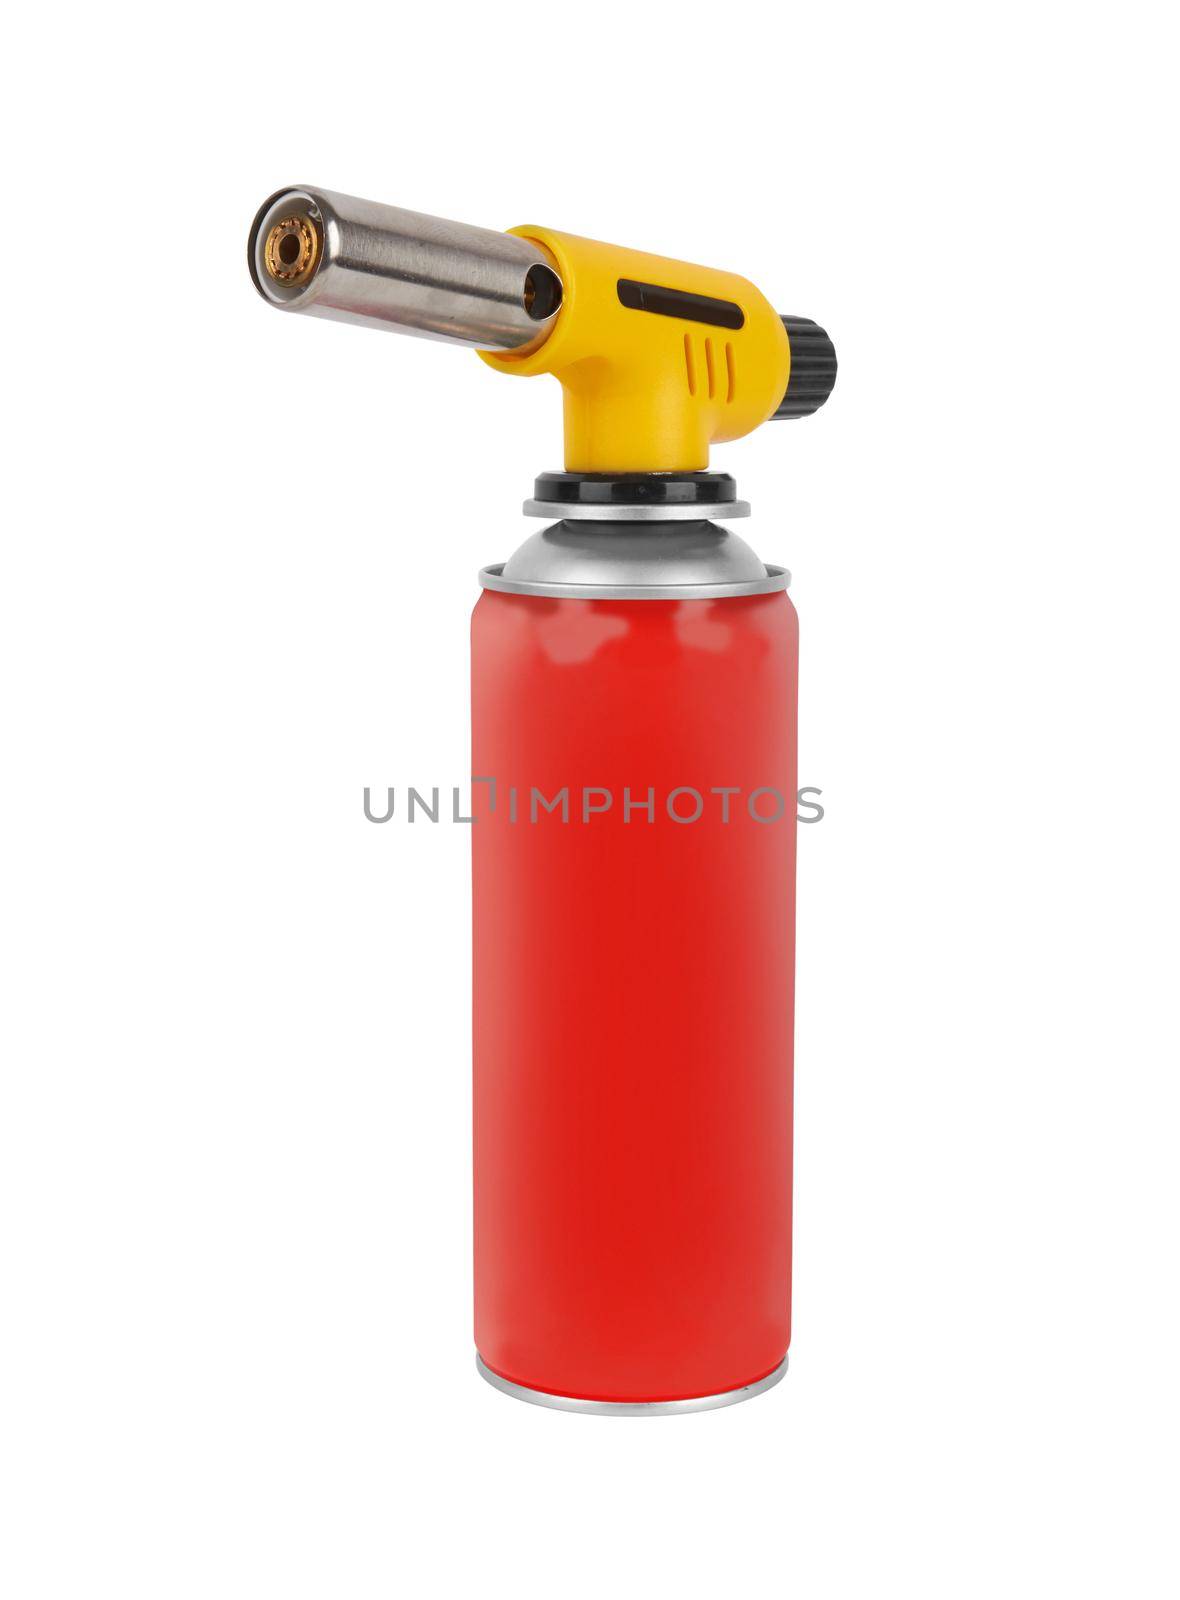 Gas can with manual torch burner by pioneer111